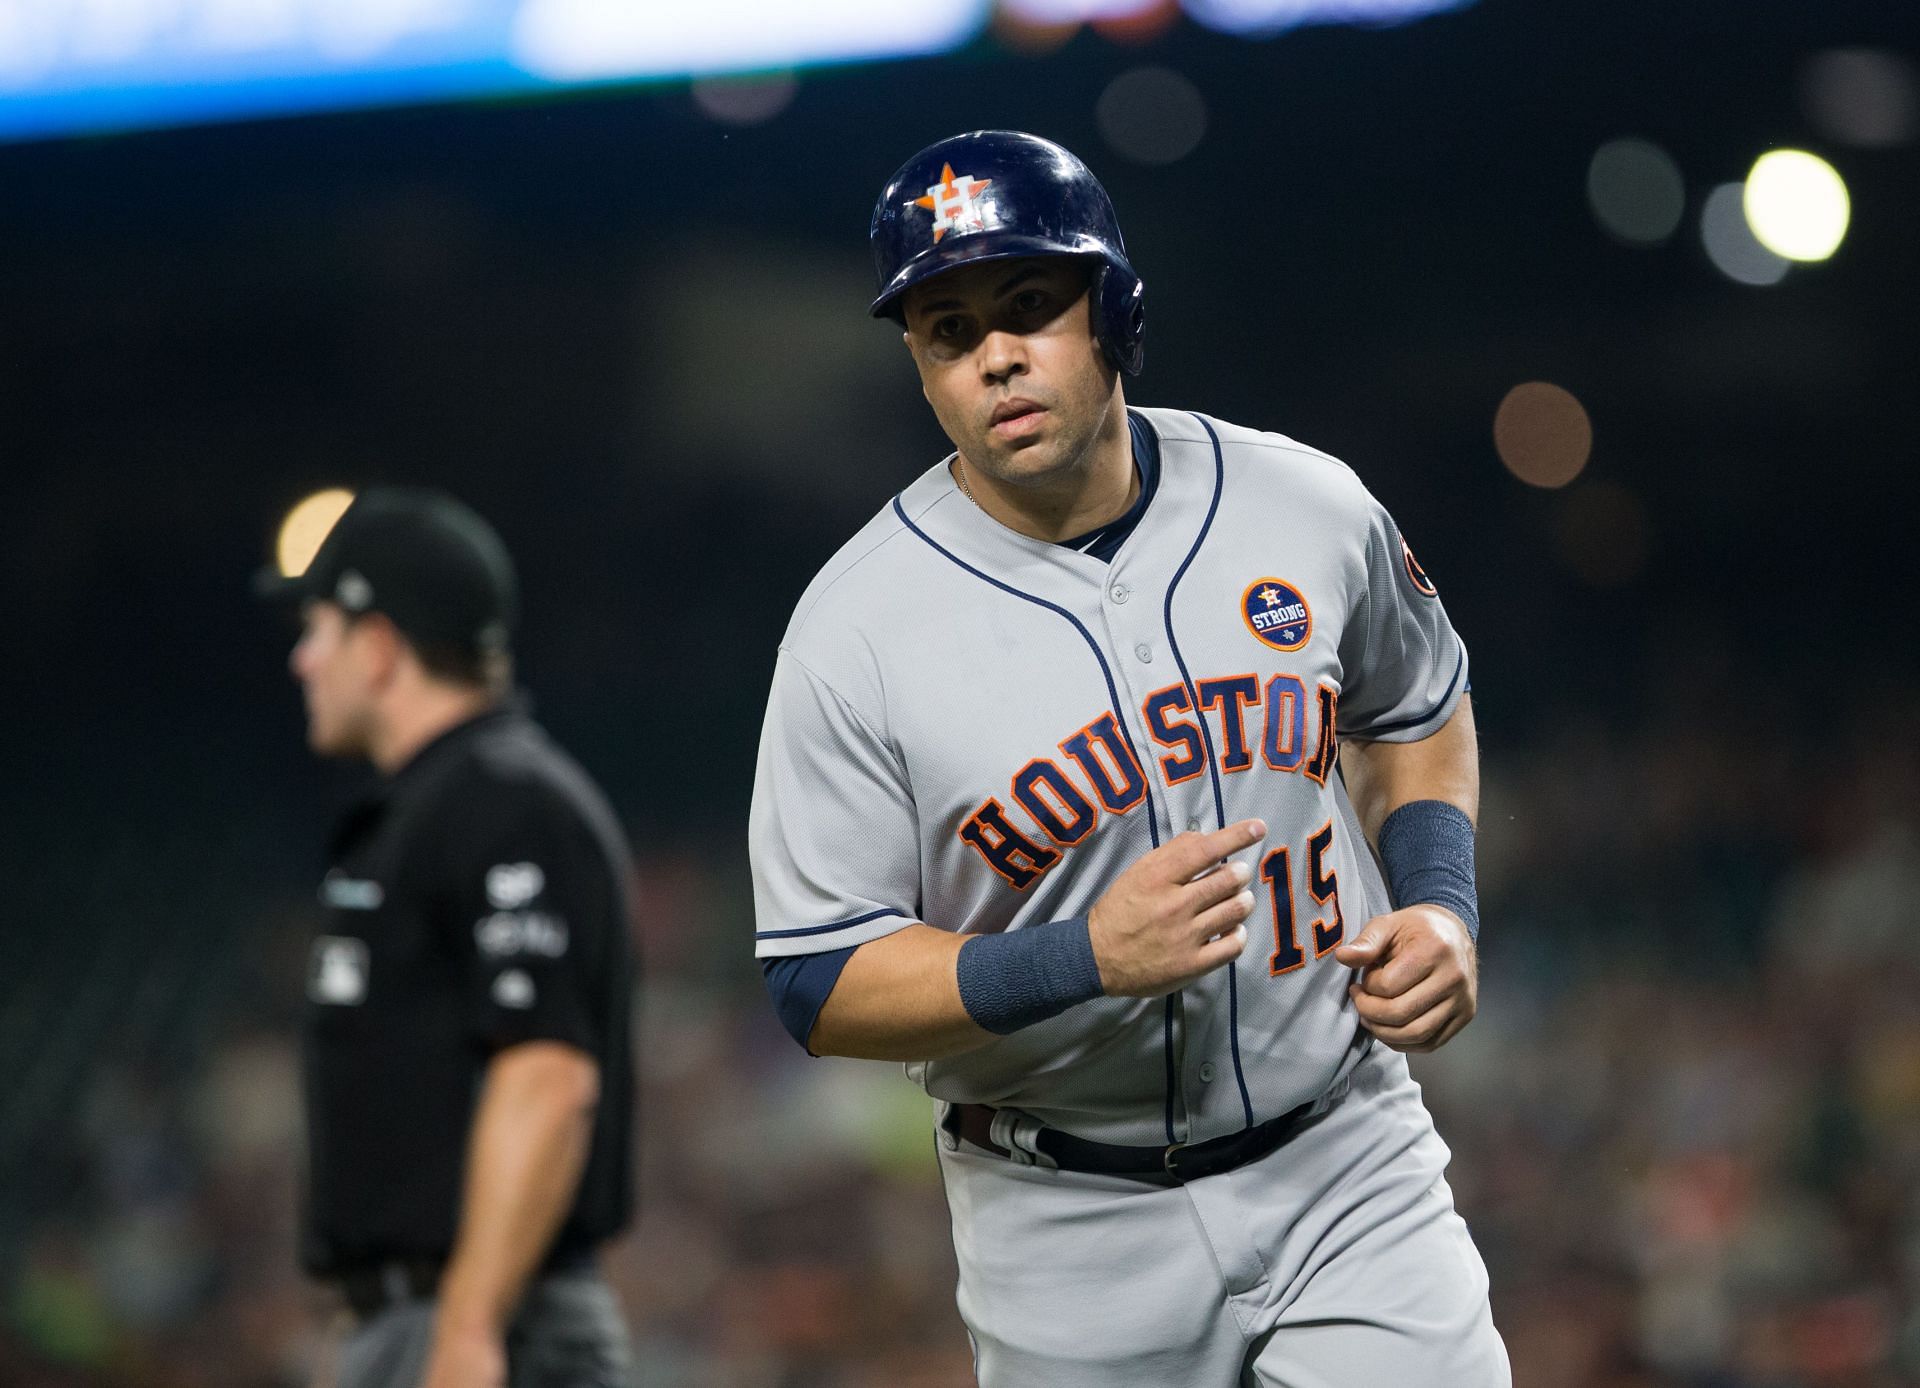 Will Carlos Beltran be in the Hall of Fame?